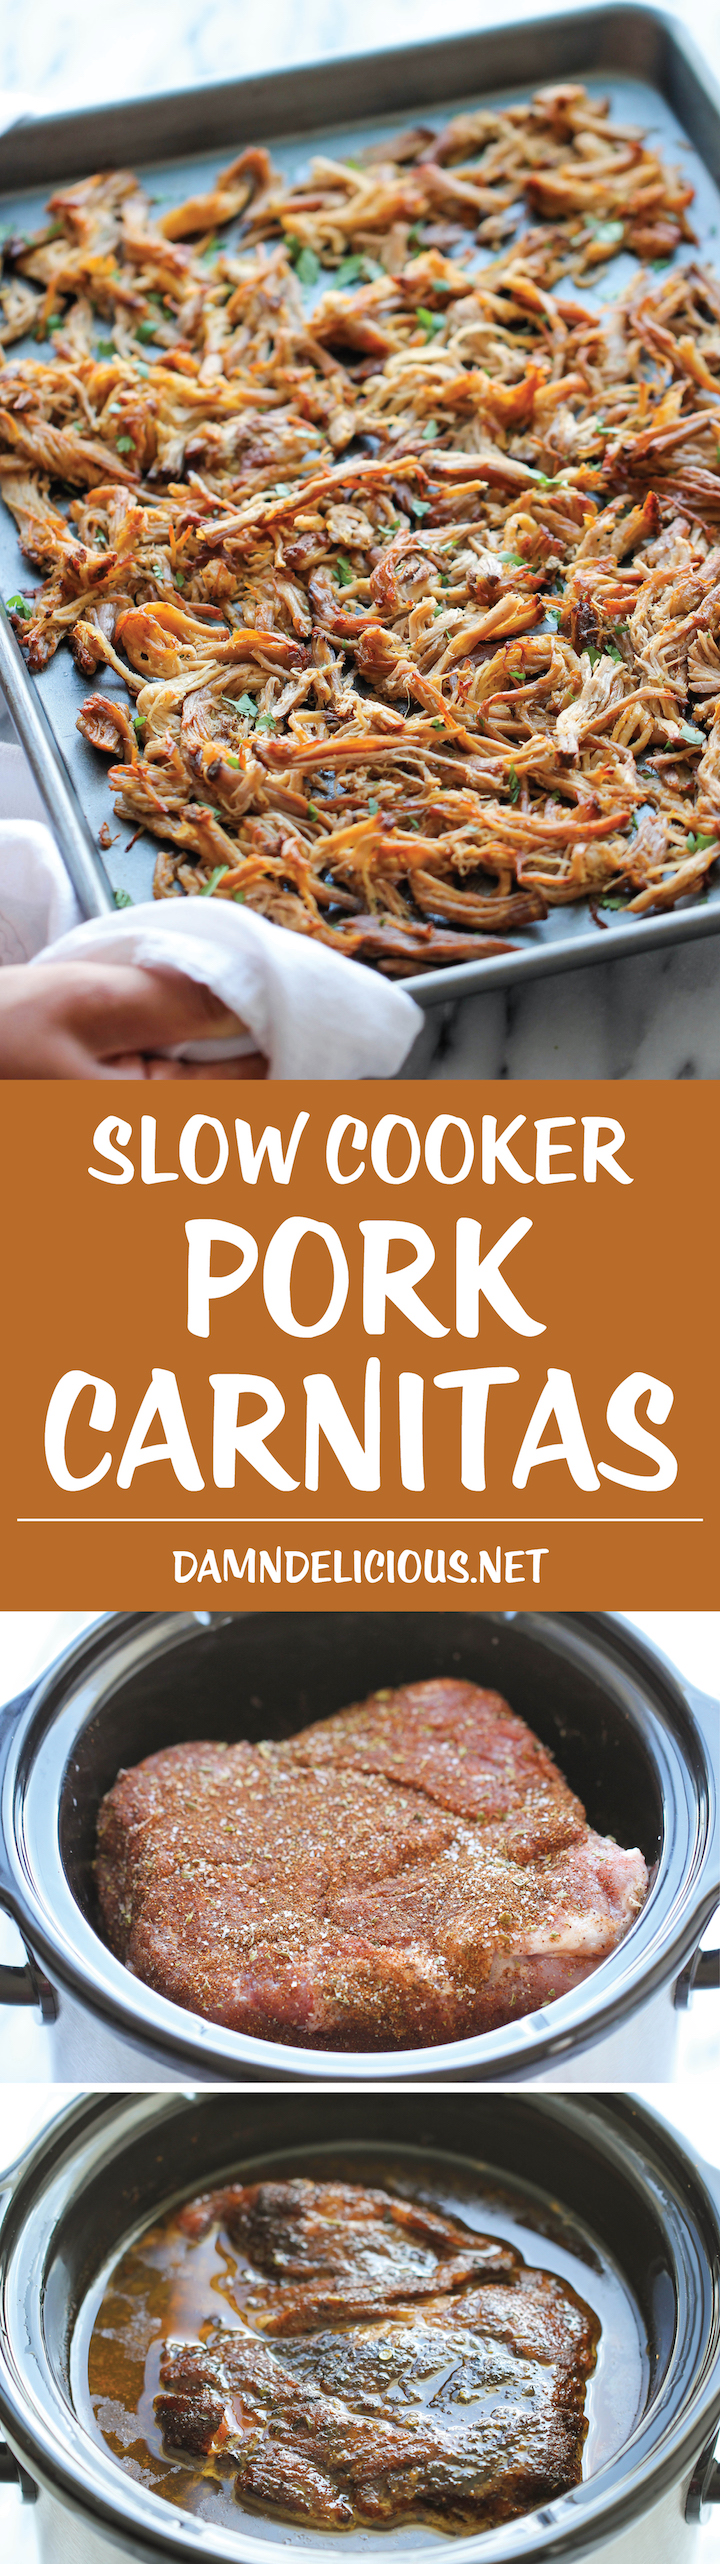 Slow Cooker Pork Carnitas - The easiest carnitas you will ever make in the crockpot, cooked low and slow for the most amazing fall-apart tender goodness!